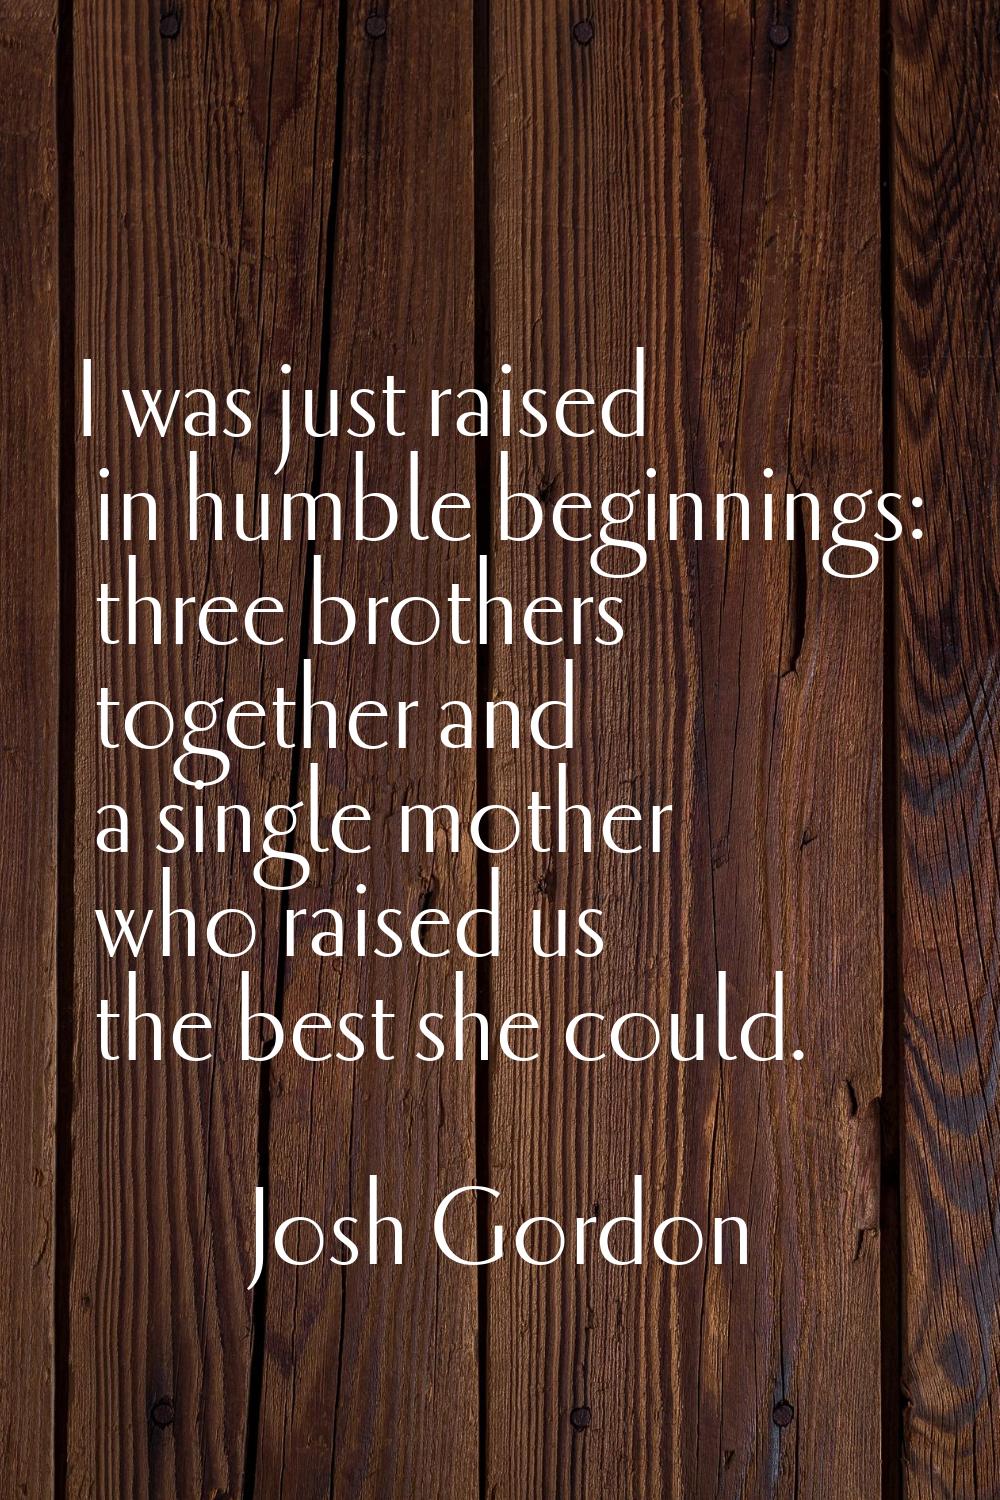 I was just raised in humble beginnings: three brothers together and a single mother who raised us t